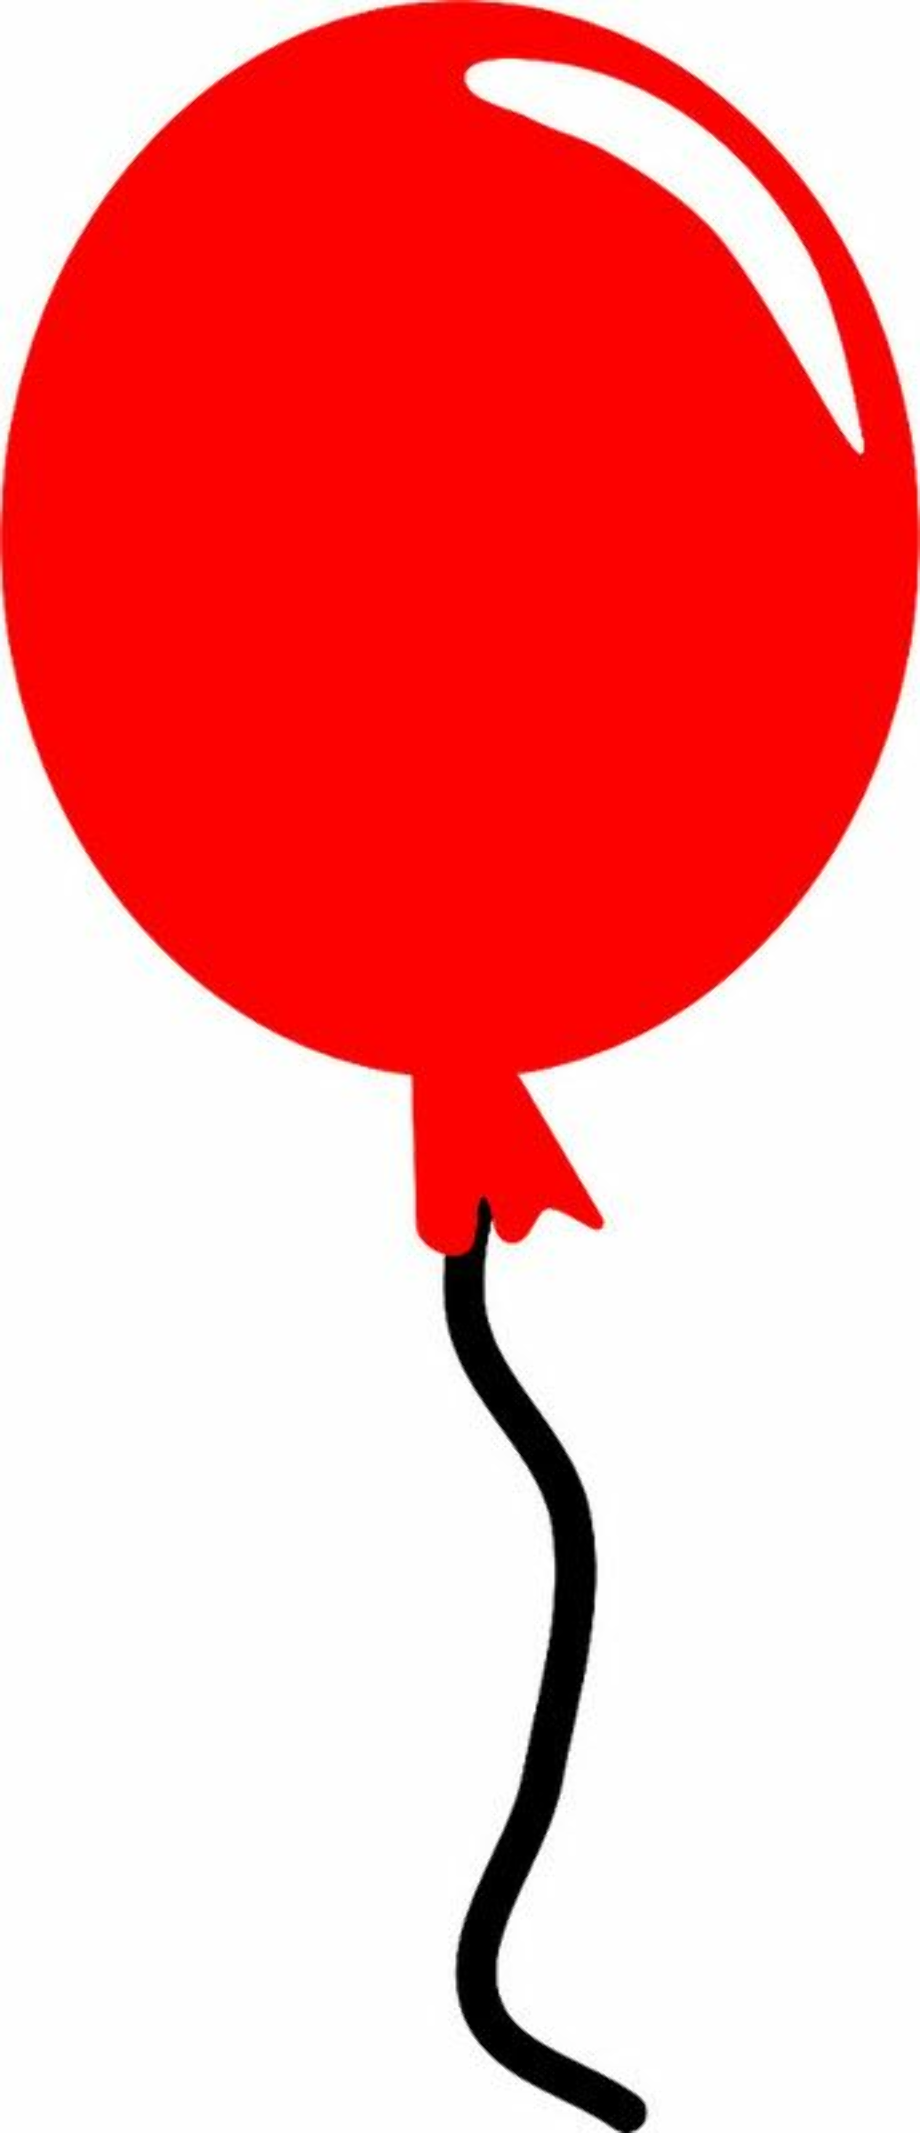 balloons clipart red